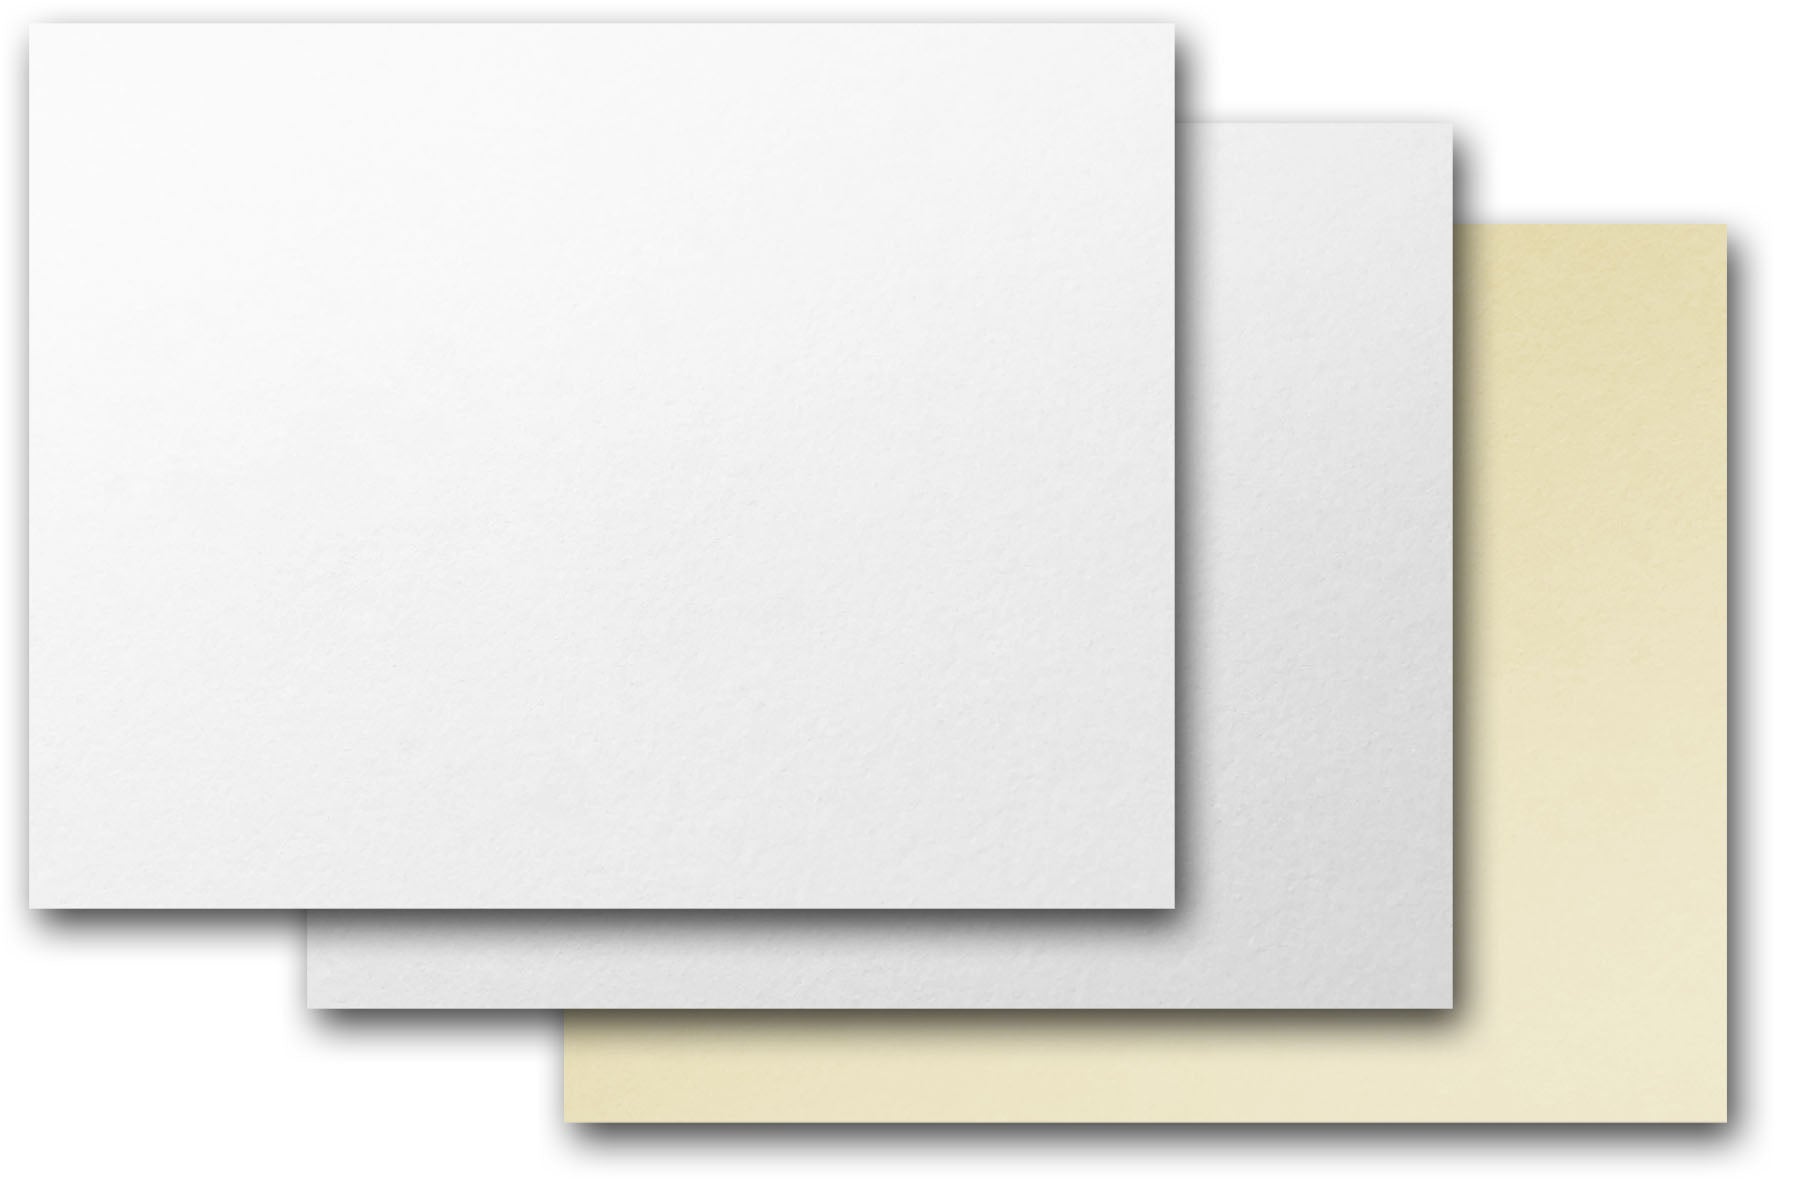 100% Cotton Card Stock - Savoy Natural White - 12X12 - 92lb Cover (249gsm)